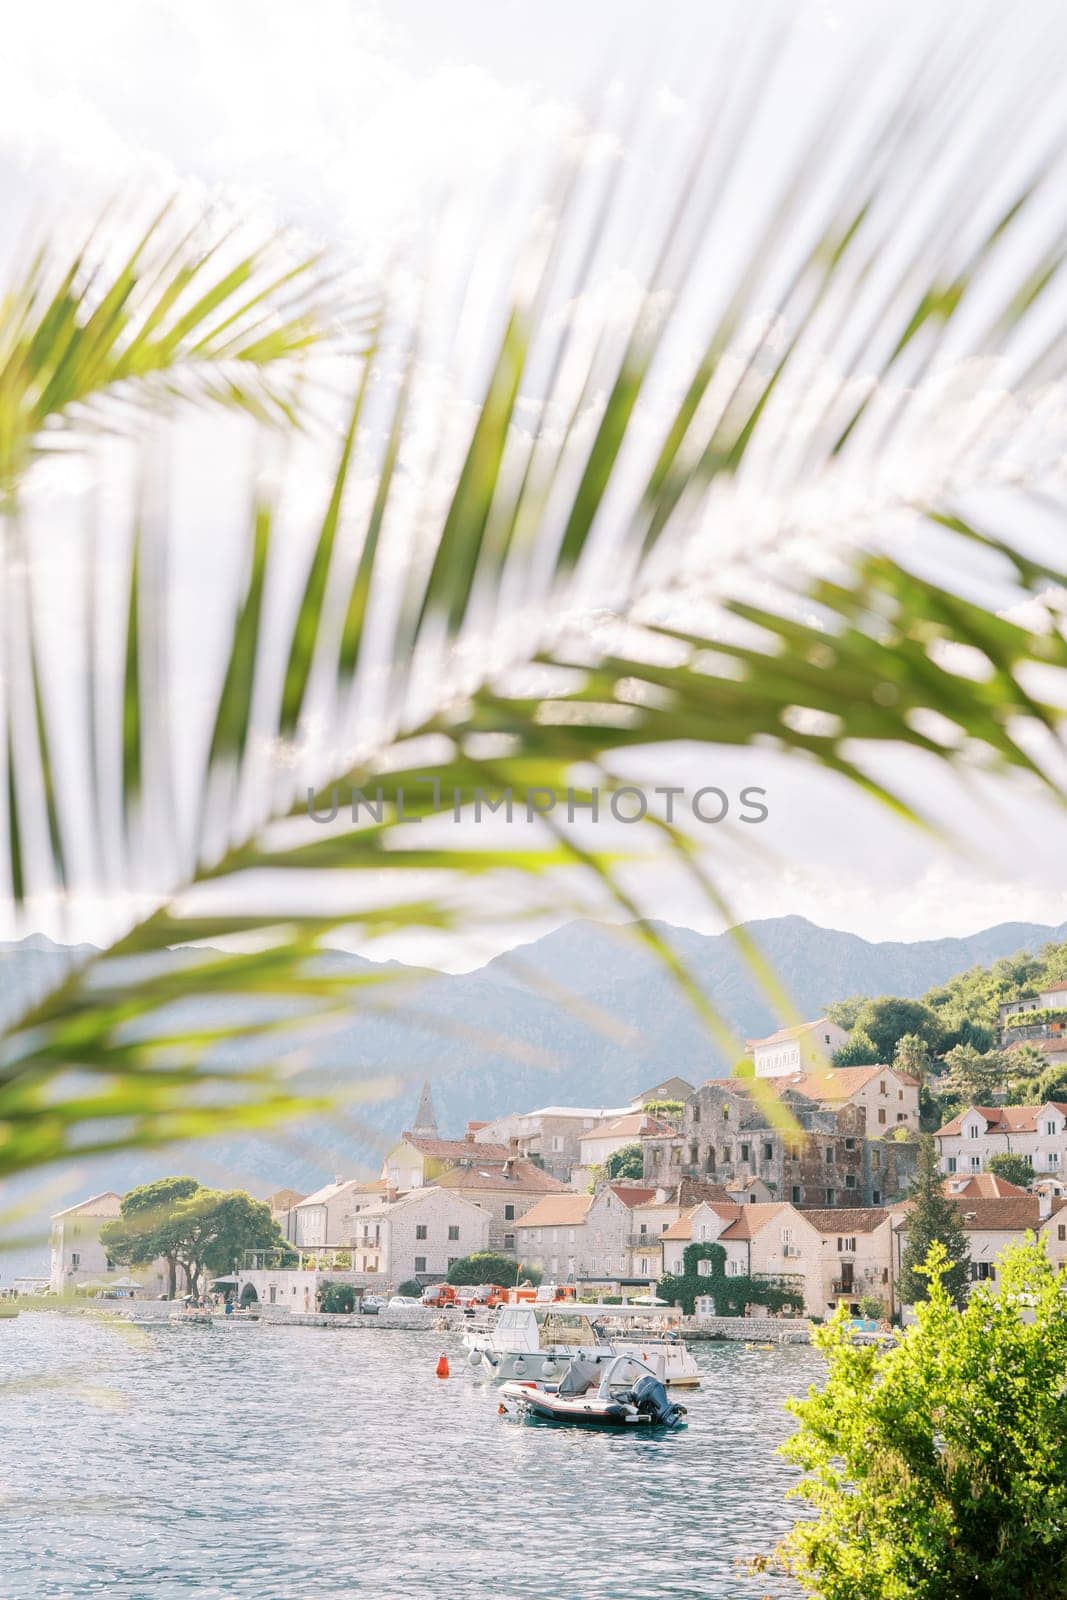 View through palm branches of boats standing off the coast of Perast. Montenegro by Nadtochiy